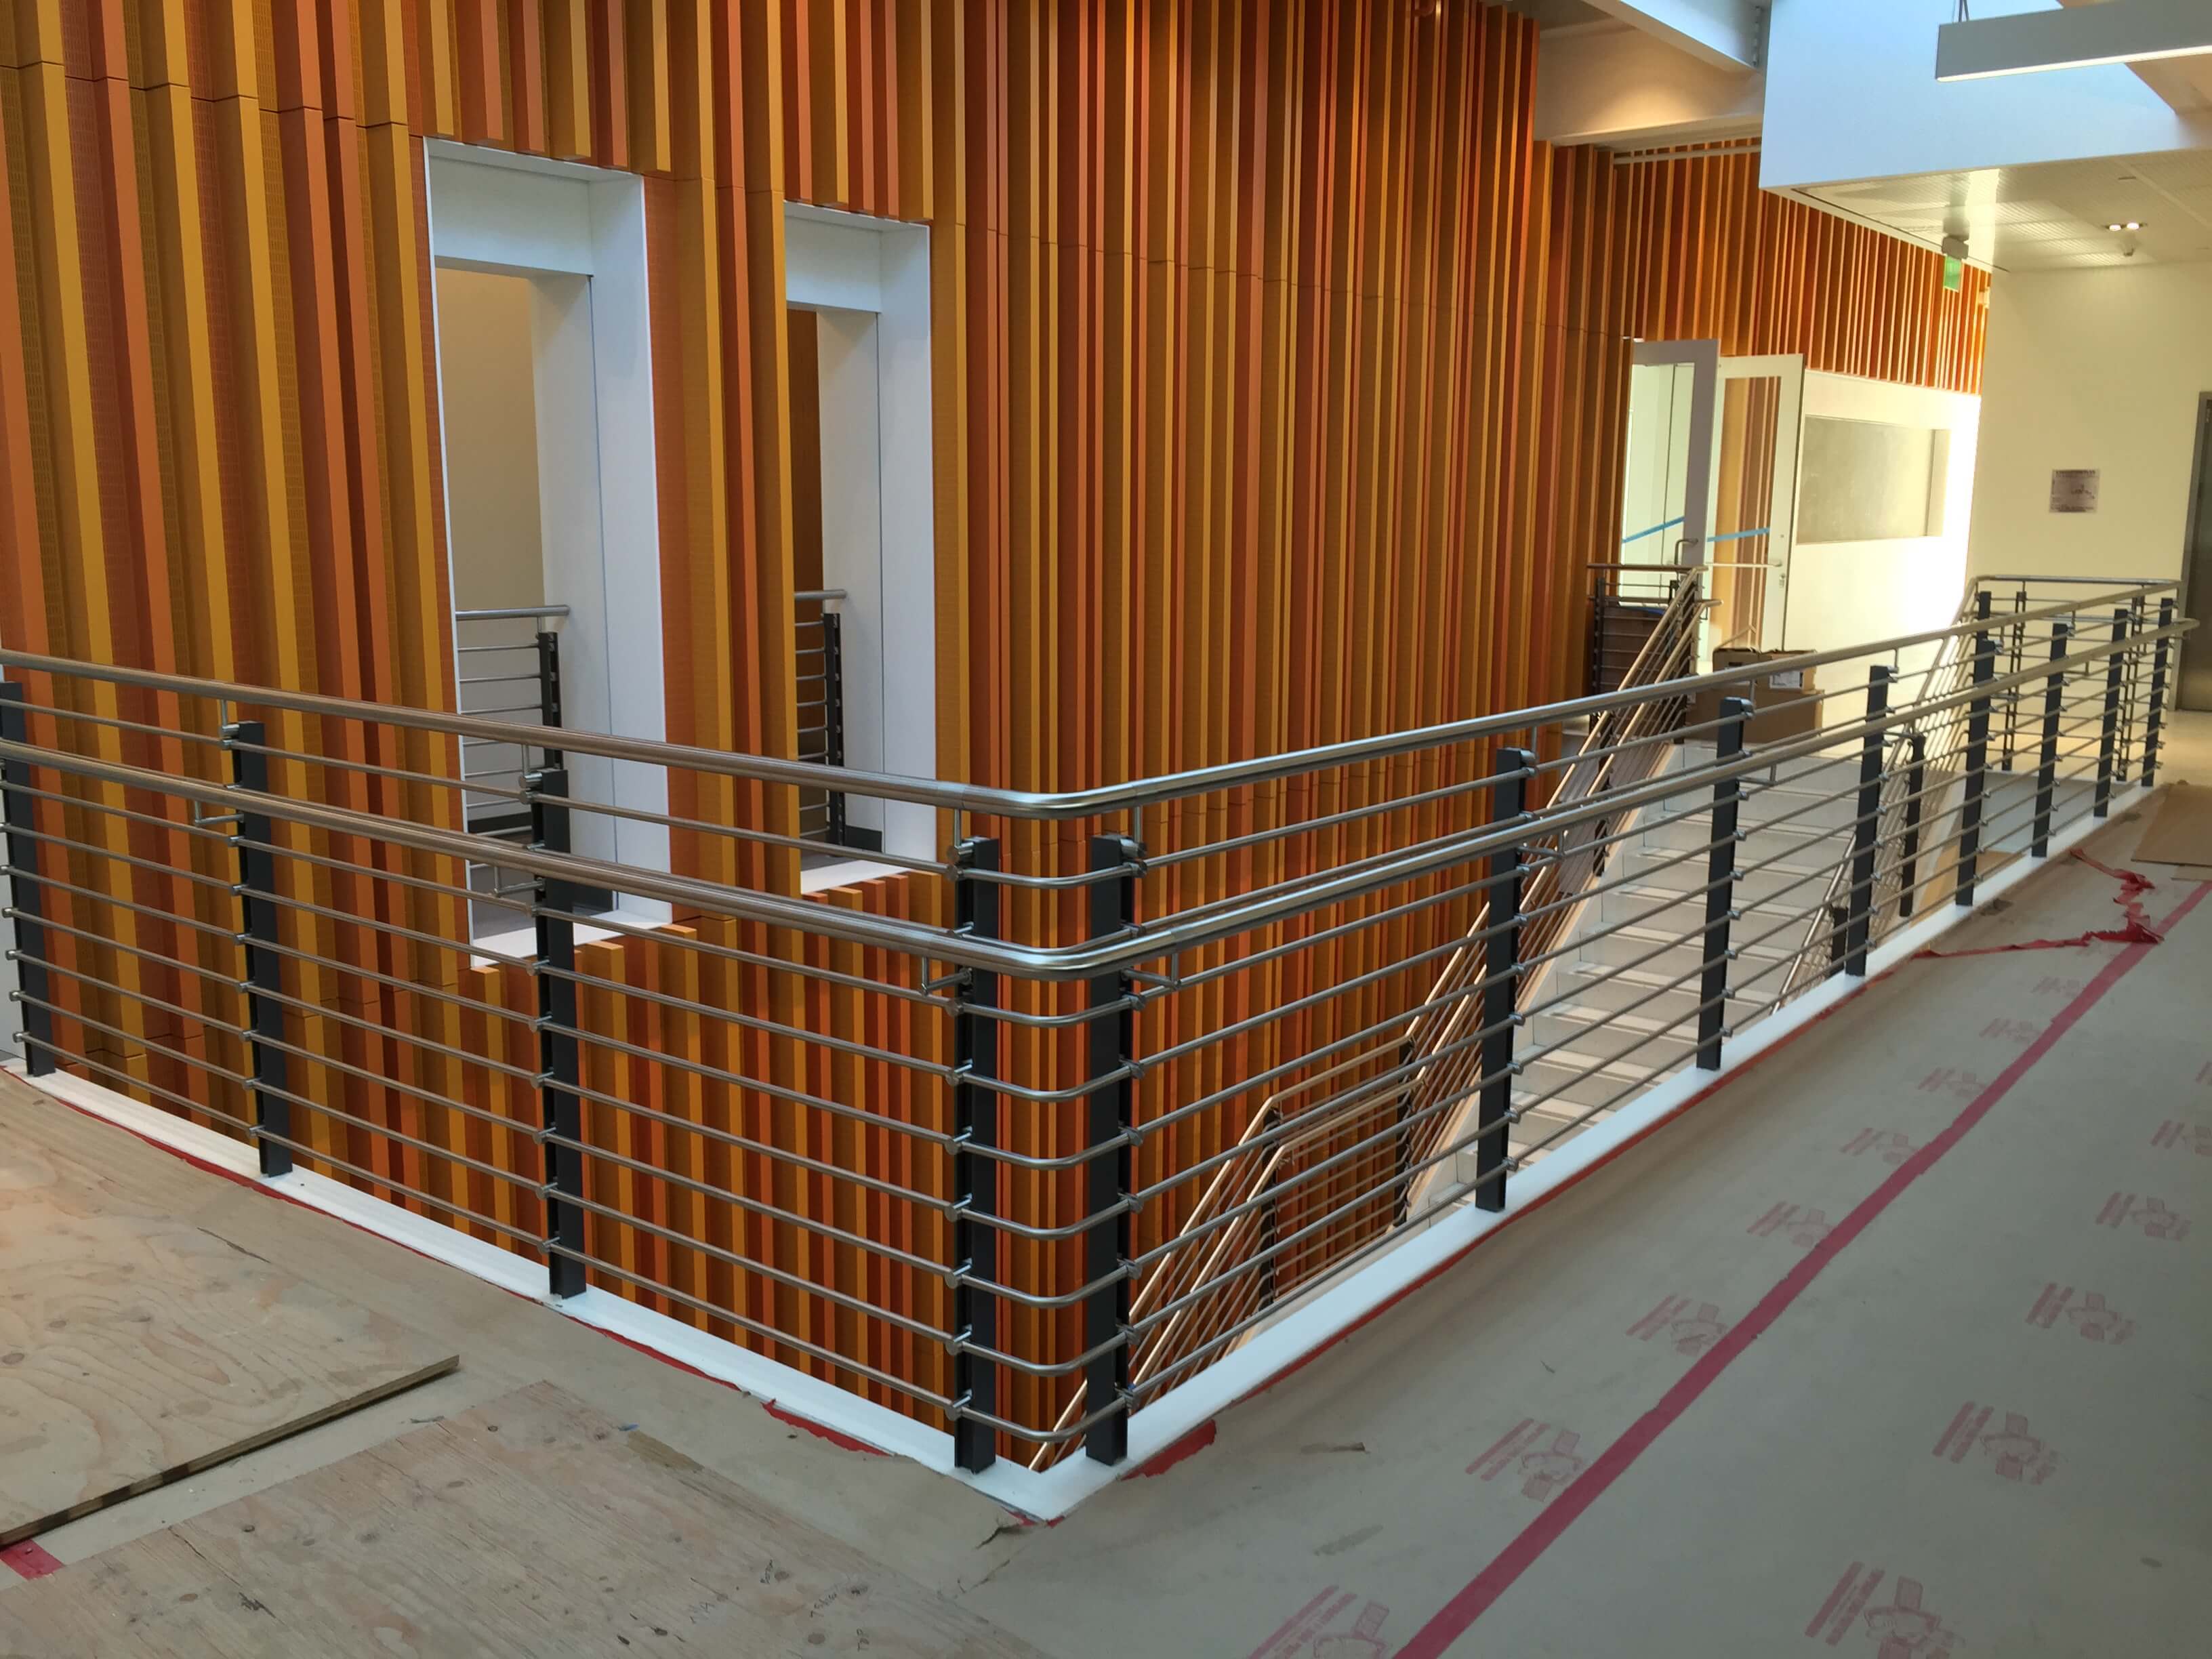 Ferric guardrail with stainless steel infill rail installation at LAPD Metropolitan Division, CA.